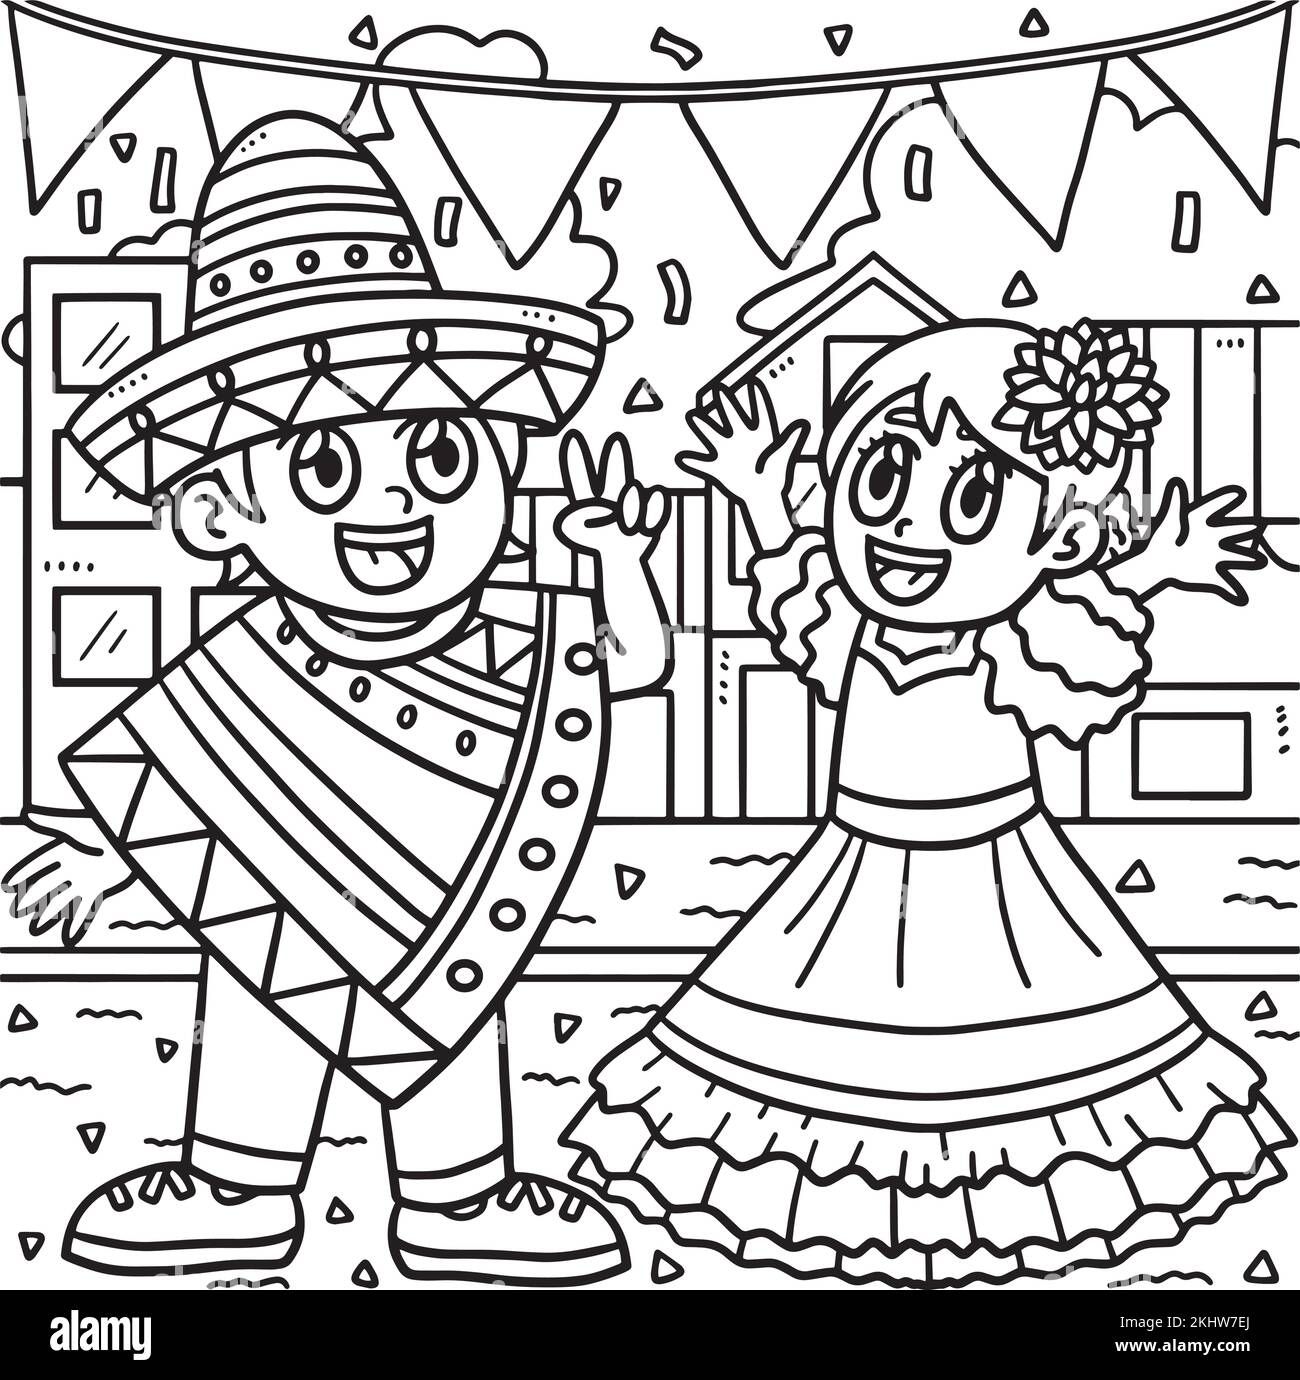 free-fiesta-coloring-pages